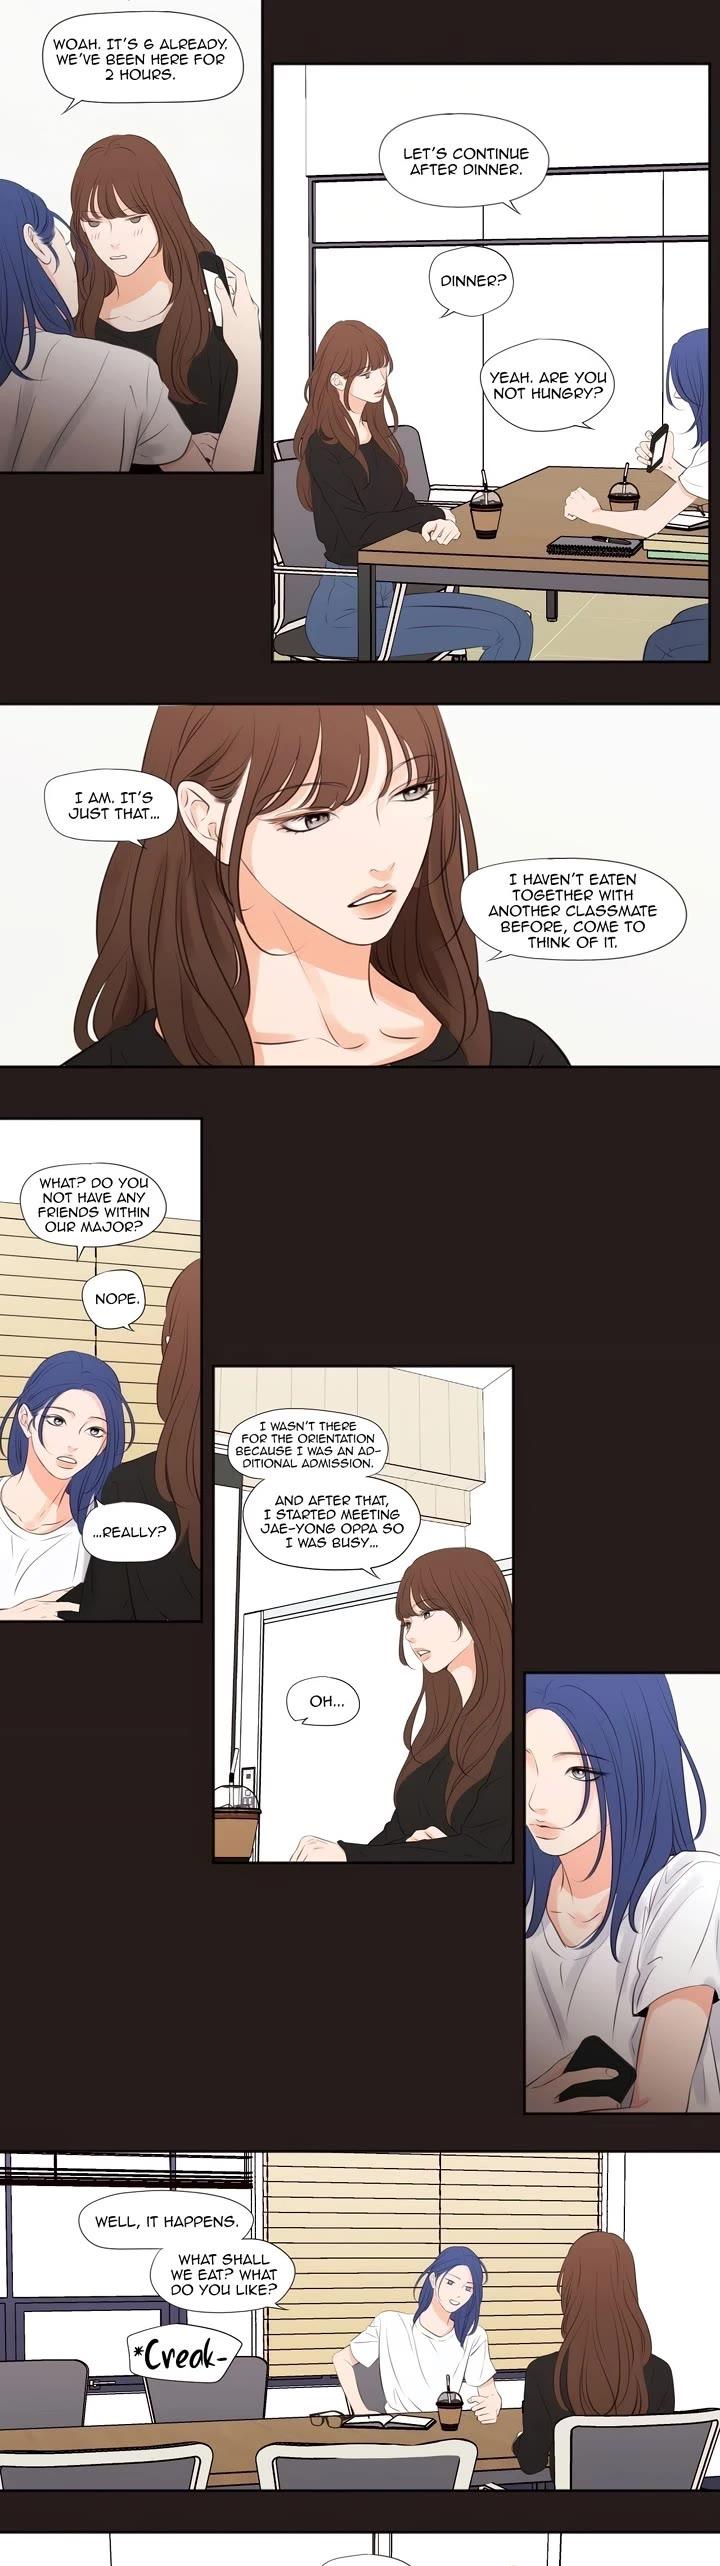 Show Me Your Bust Ch.4 Page 3 - Mangago